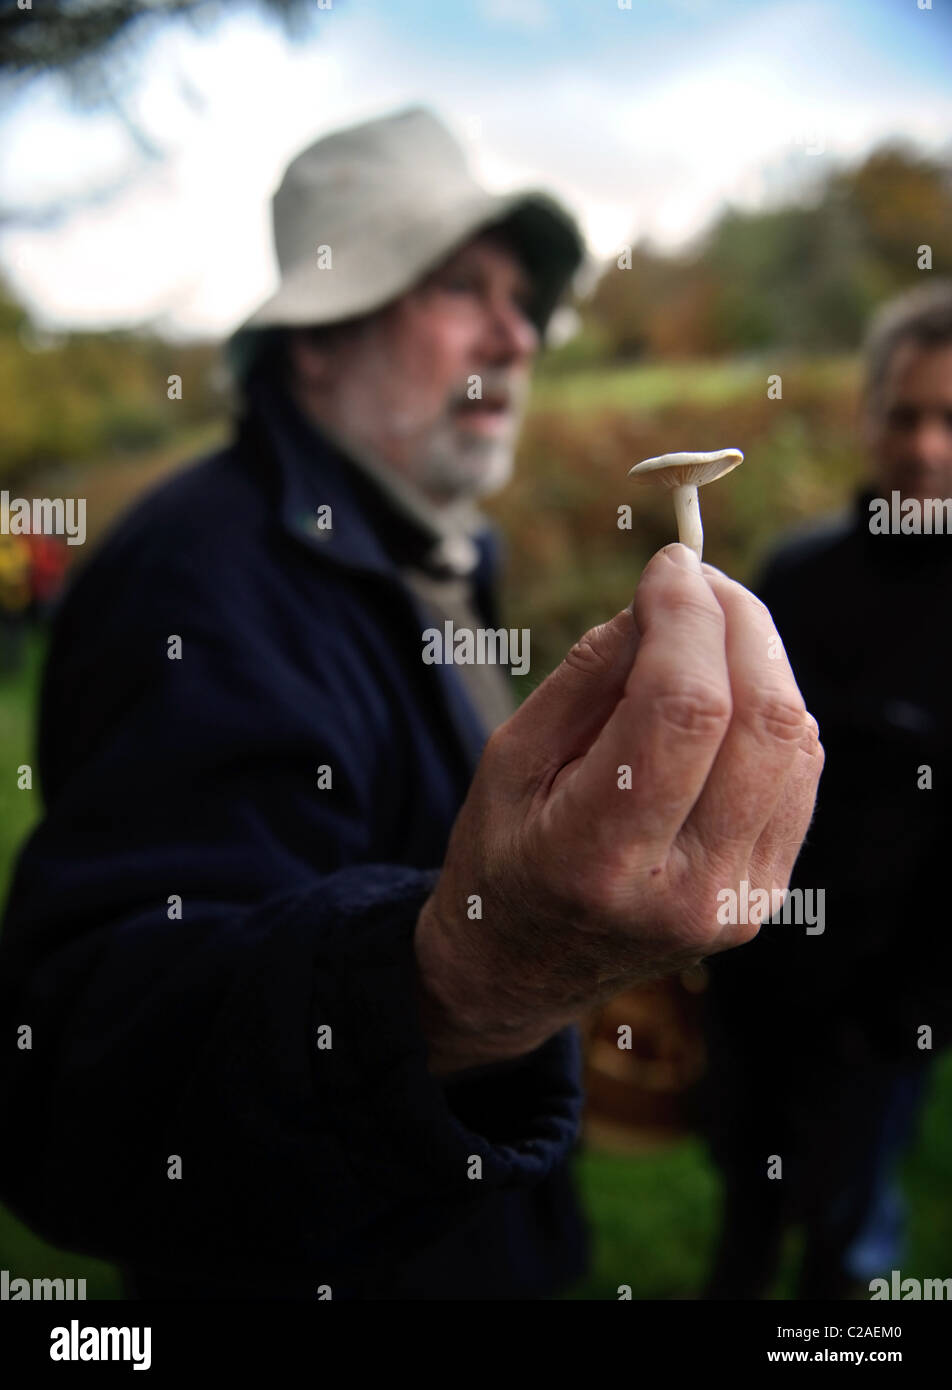 Foraging expert Raoul Van Den Broucke displays the deadly poisonous mushroom Clitocybe Dealbata or Ivory Funnel during a field t Stock Photo